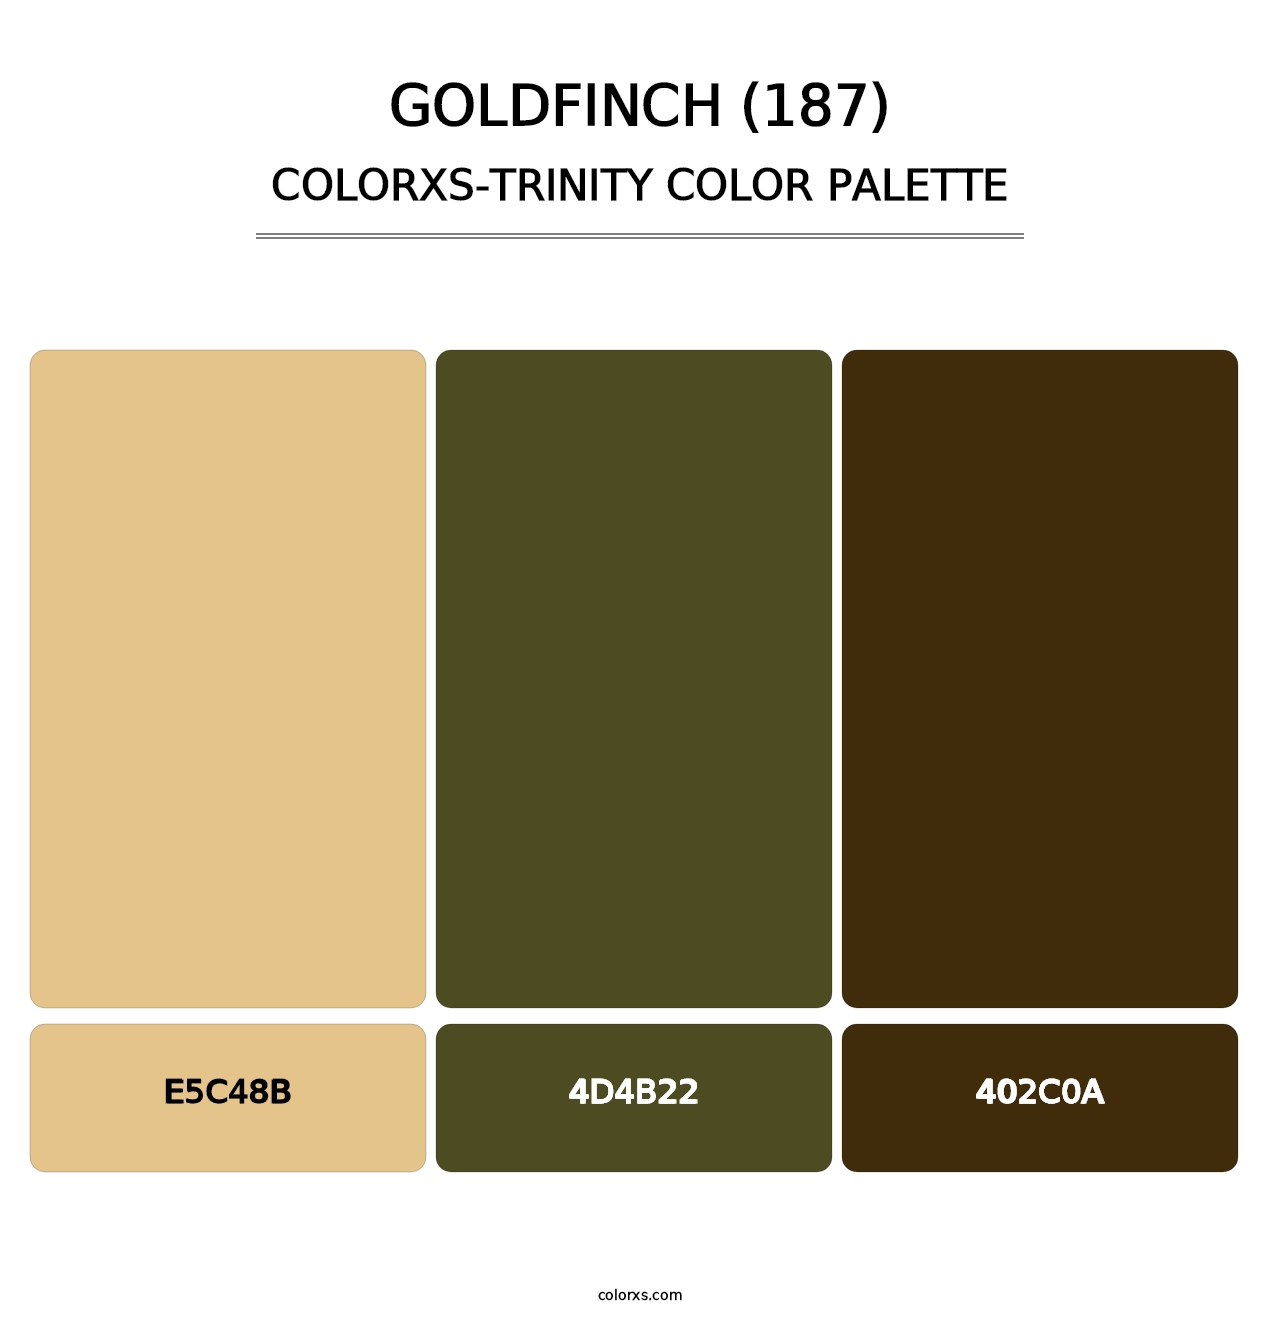 Goldfinch (187) - Colorxs Trinity Palette